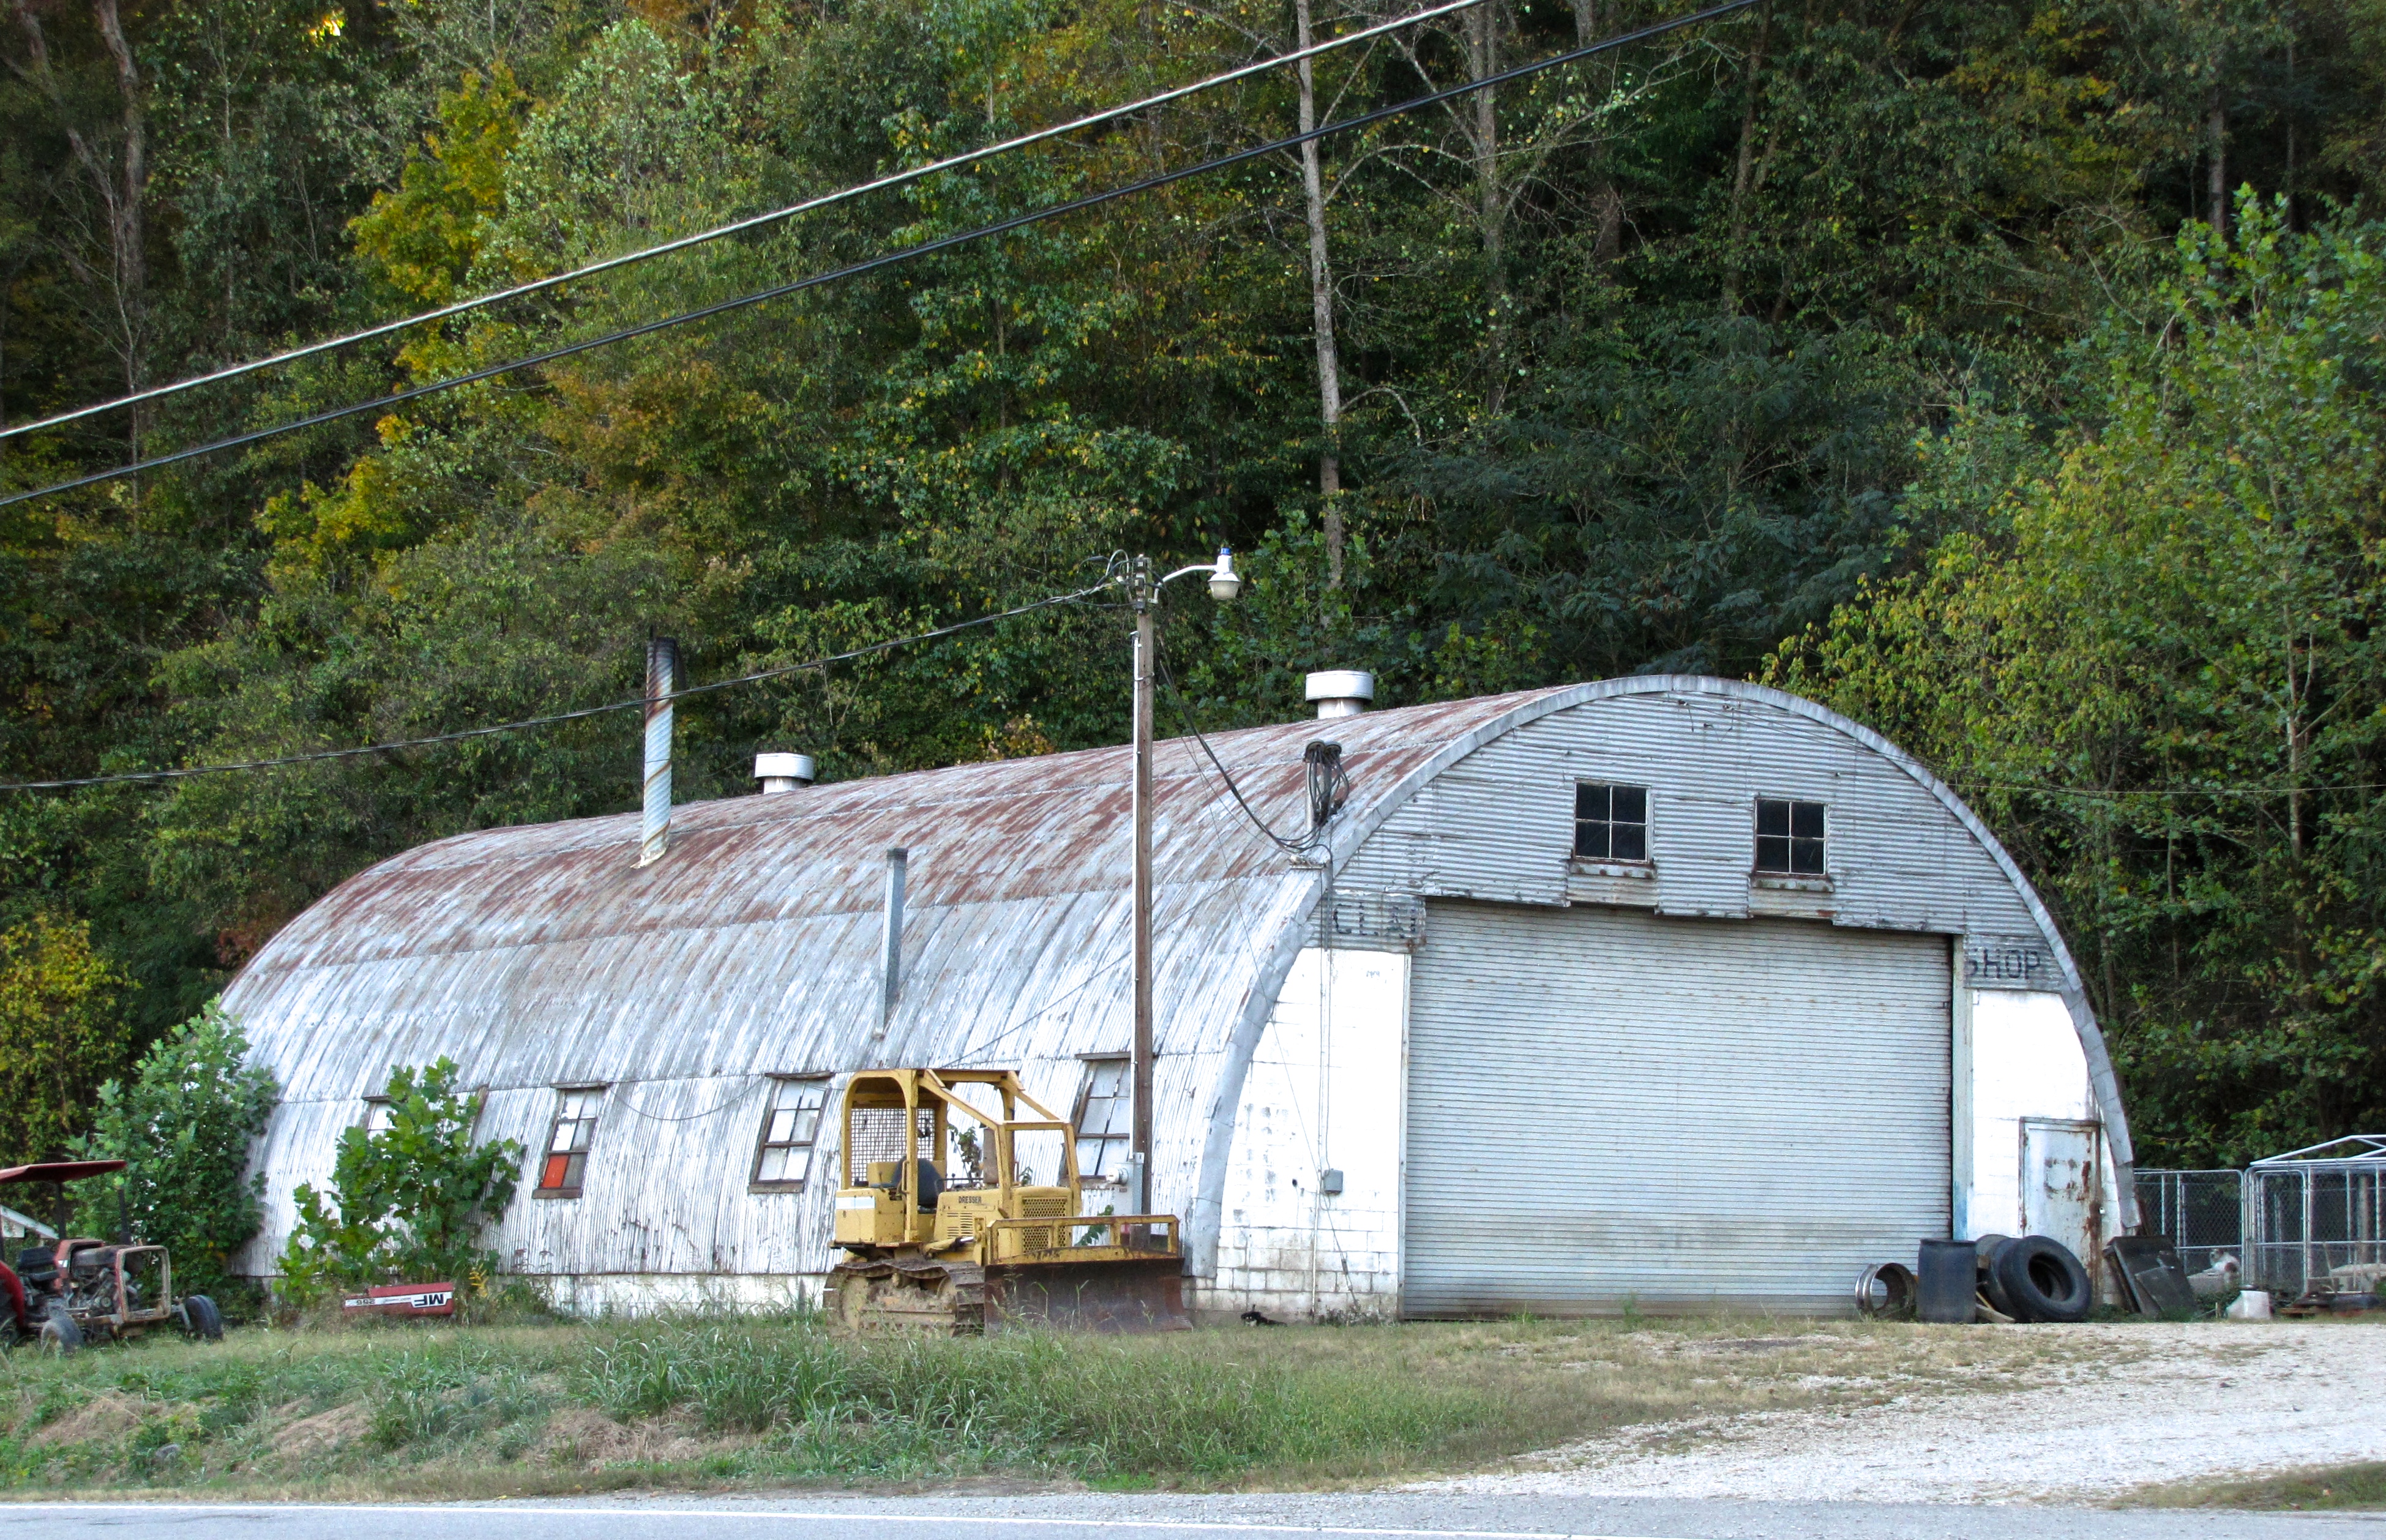 quonset hut in Webster, MA